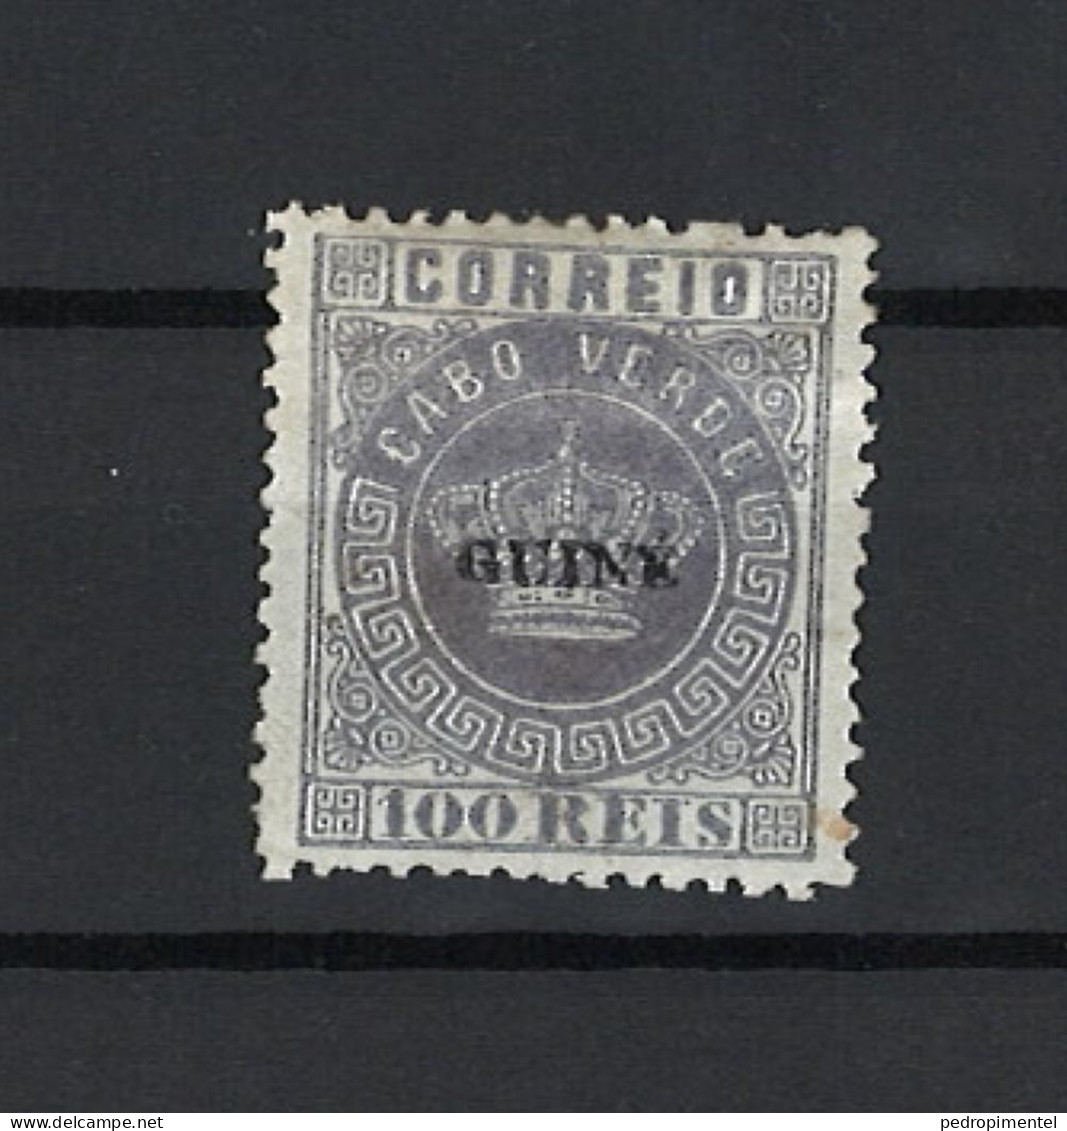 Portugal Guinee 1879-82 First Issue (Crown With Small GUINE Surcharge) 100 Reis Condition MH NGAI Mundifil Guinee #7 - Portugiesisch-Guinea